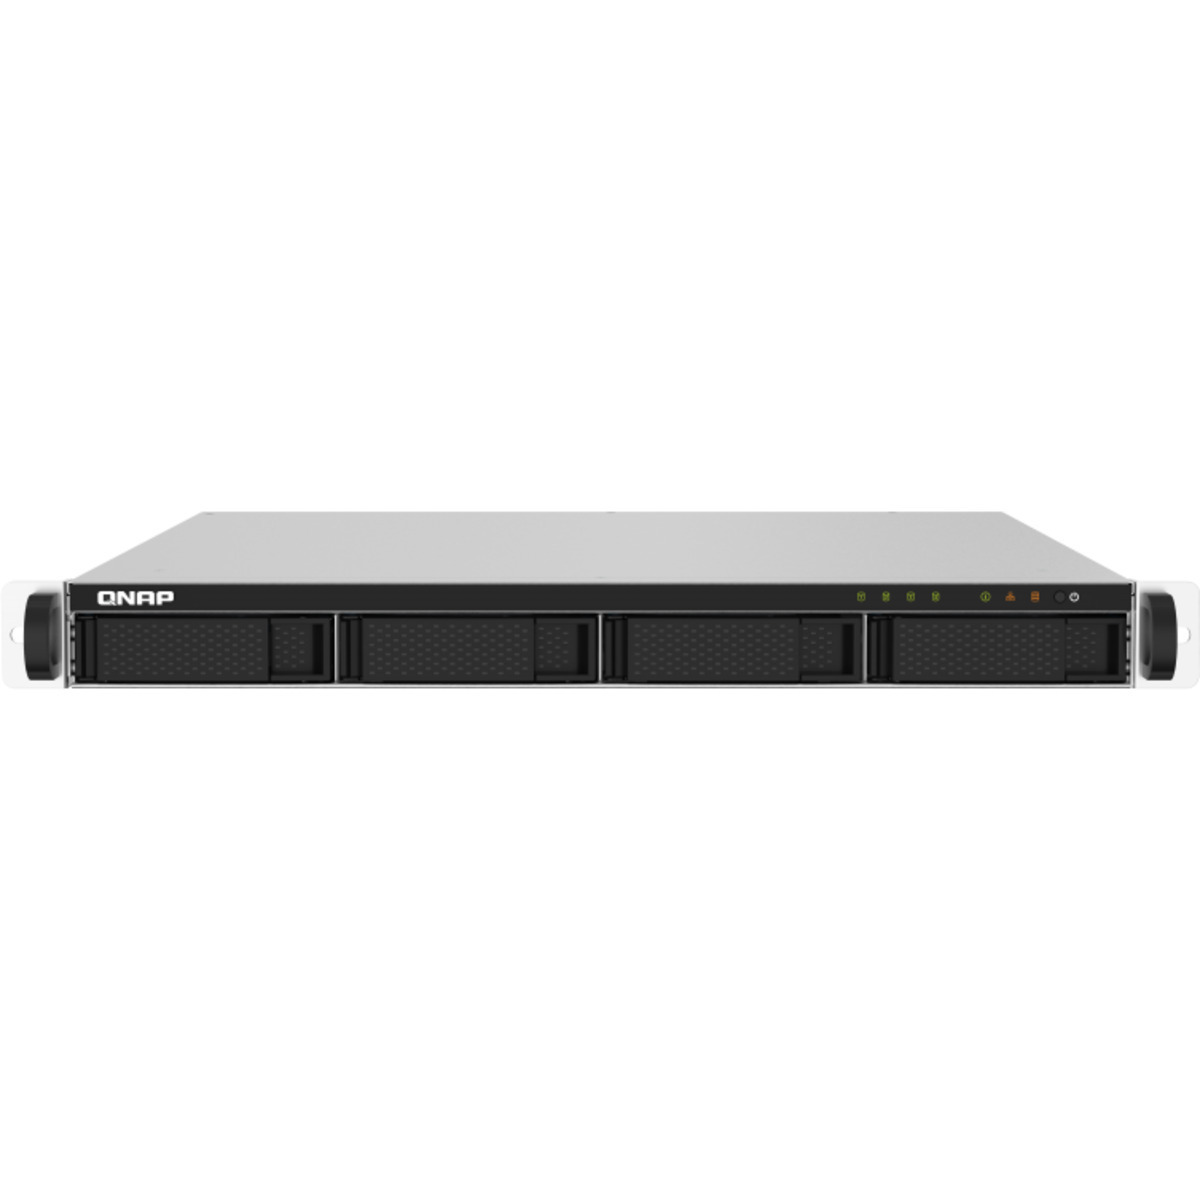 QNAP TS-432PXU 12tb 4-Bay RackMount Personal / Basic Home / Small Office NAS - Network Attached Storage Device 2x6tb Seagate IronWolf ST6000VN006 3.5 5400rpm SATA 6Gb/s HDD NAS Class Drives Installed - Burn-In Tested - FREE RAM UPGRADE TS-432PXU